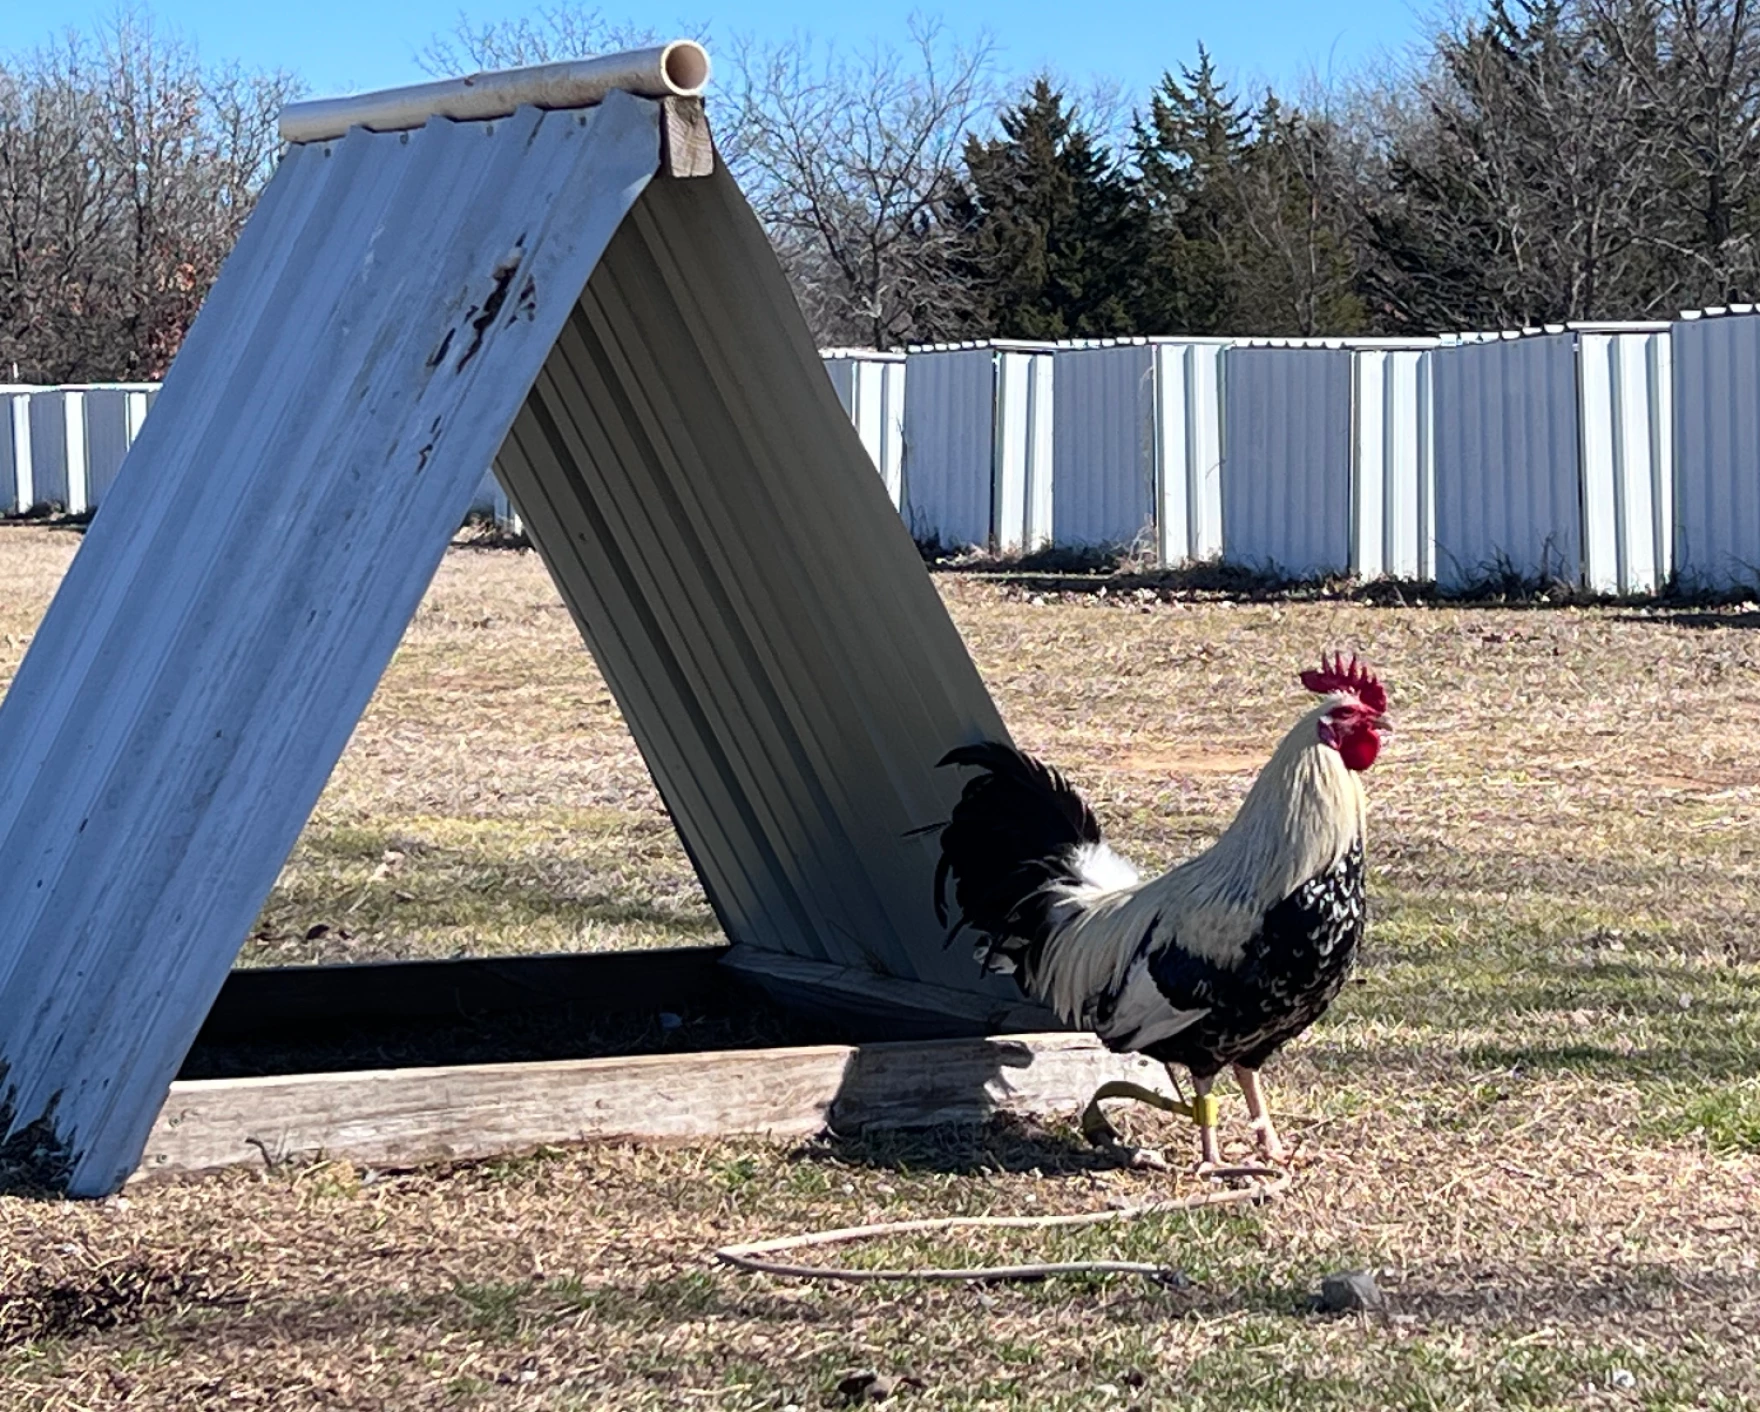 Raising Roosters: A Lucrative Business with Controversial Consequences